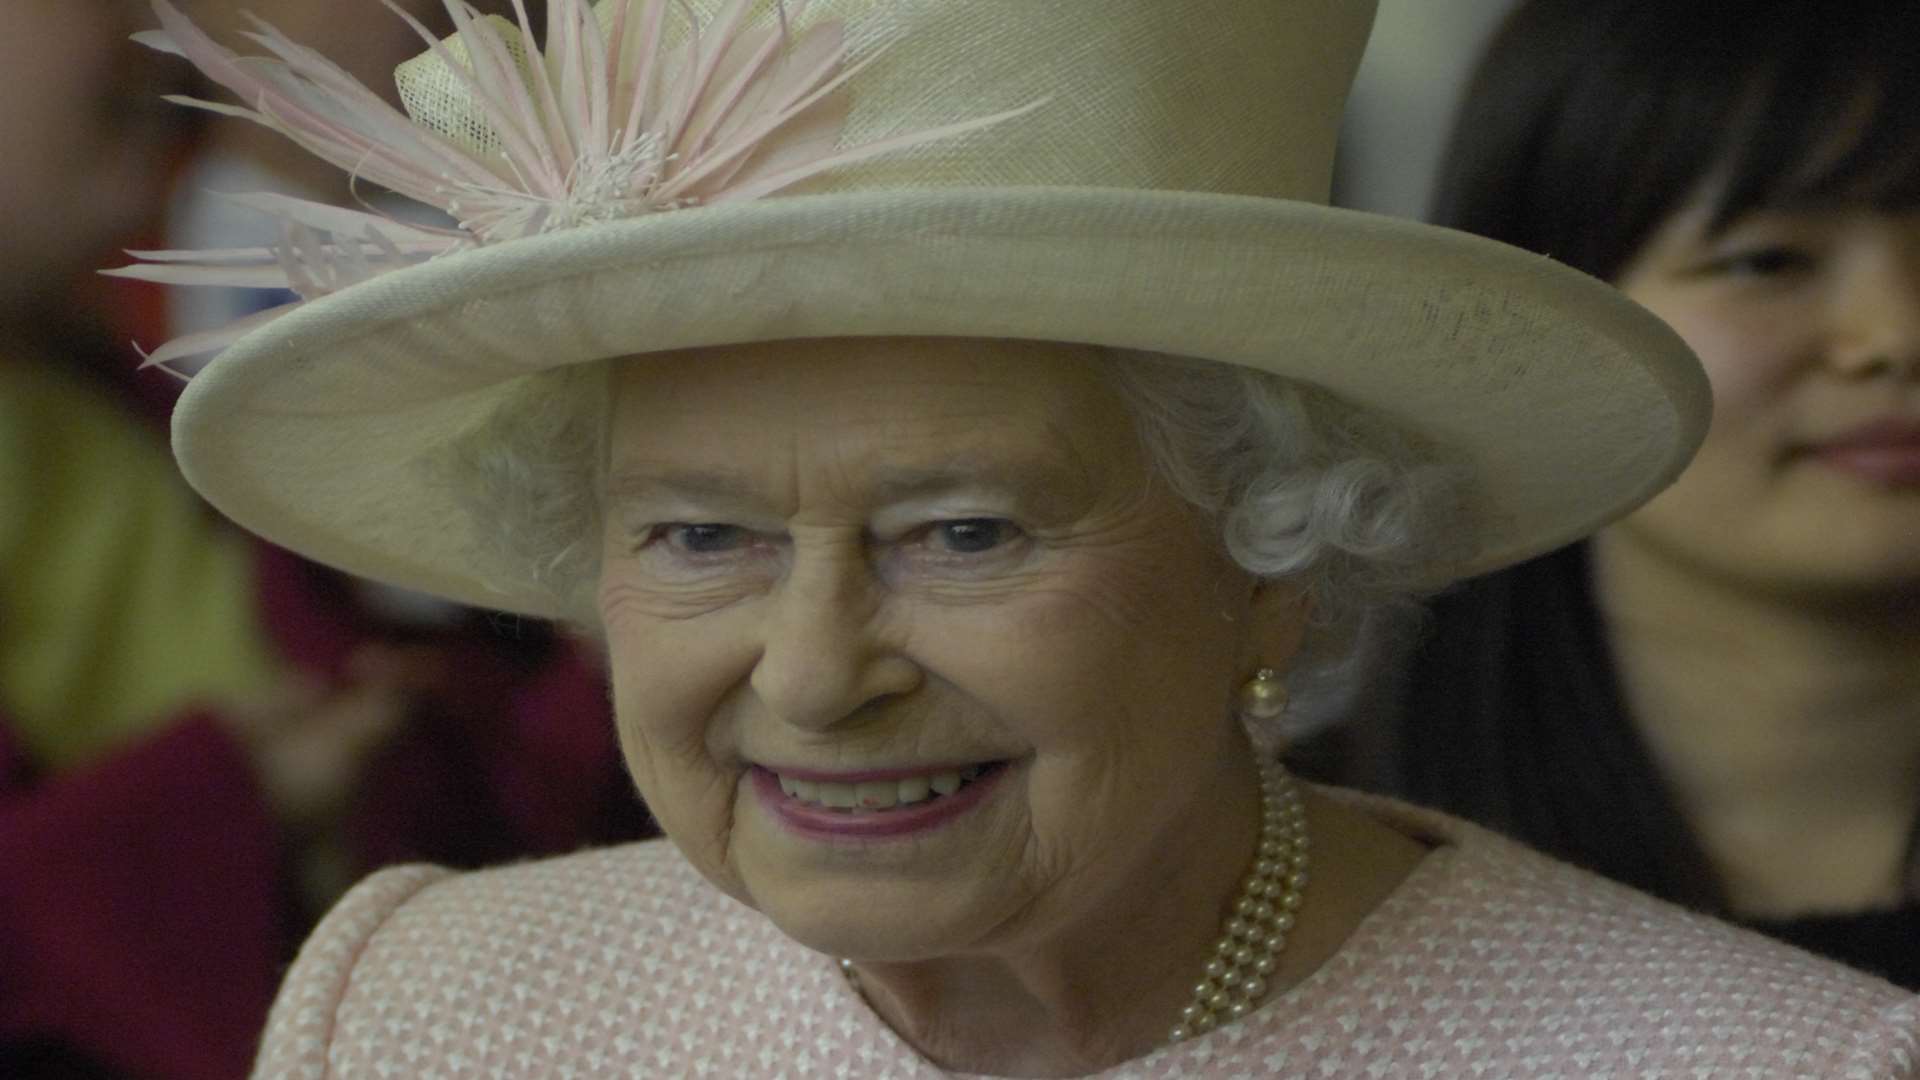 The Queen celebrated her 90th birthday last year